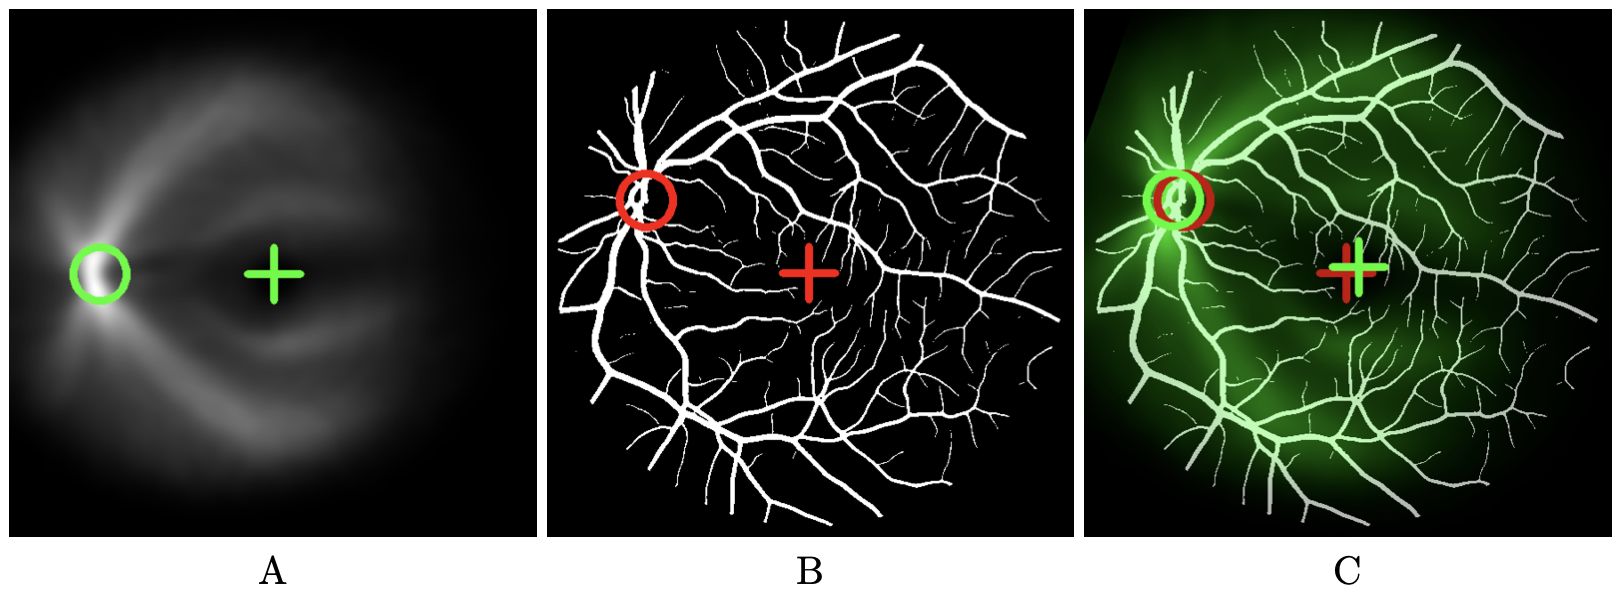 This figures illustrates how our method to detect the fovea works. It contains three images. The left image shows the vessel density map. This map is obtained by realigning and then averaging a set of vessel maps for which fovea and optic disk position are known. The are realigned based upon fixed positions of fovea and optic disk which are marked by a green cross and a green circle respectively. The middle image shows the vessel map where the fovea position is unknown. In our example, the ground truth is available allowing error estimates. Red cross indicates the true position of the fovea we are looking for. The right image shows the vessel density map in green-scale color superimposed on the vessels map after registration. The fovea position of the vessel density map after registration serves as an estimate for the fovea position. It is represented by a green cross. When ground truth is available (red cross), error can be estimated (distance between green and red crosses).